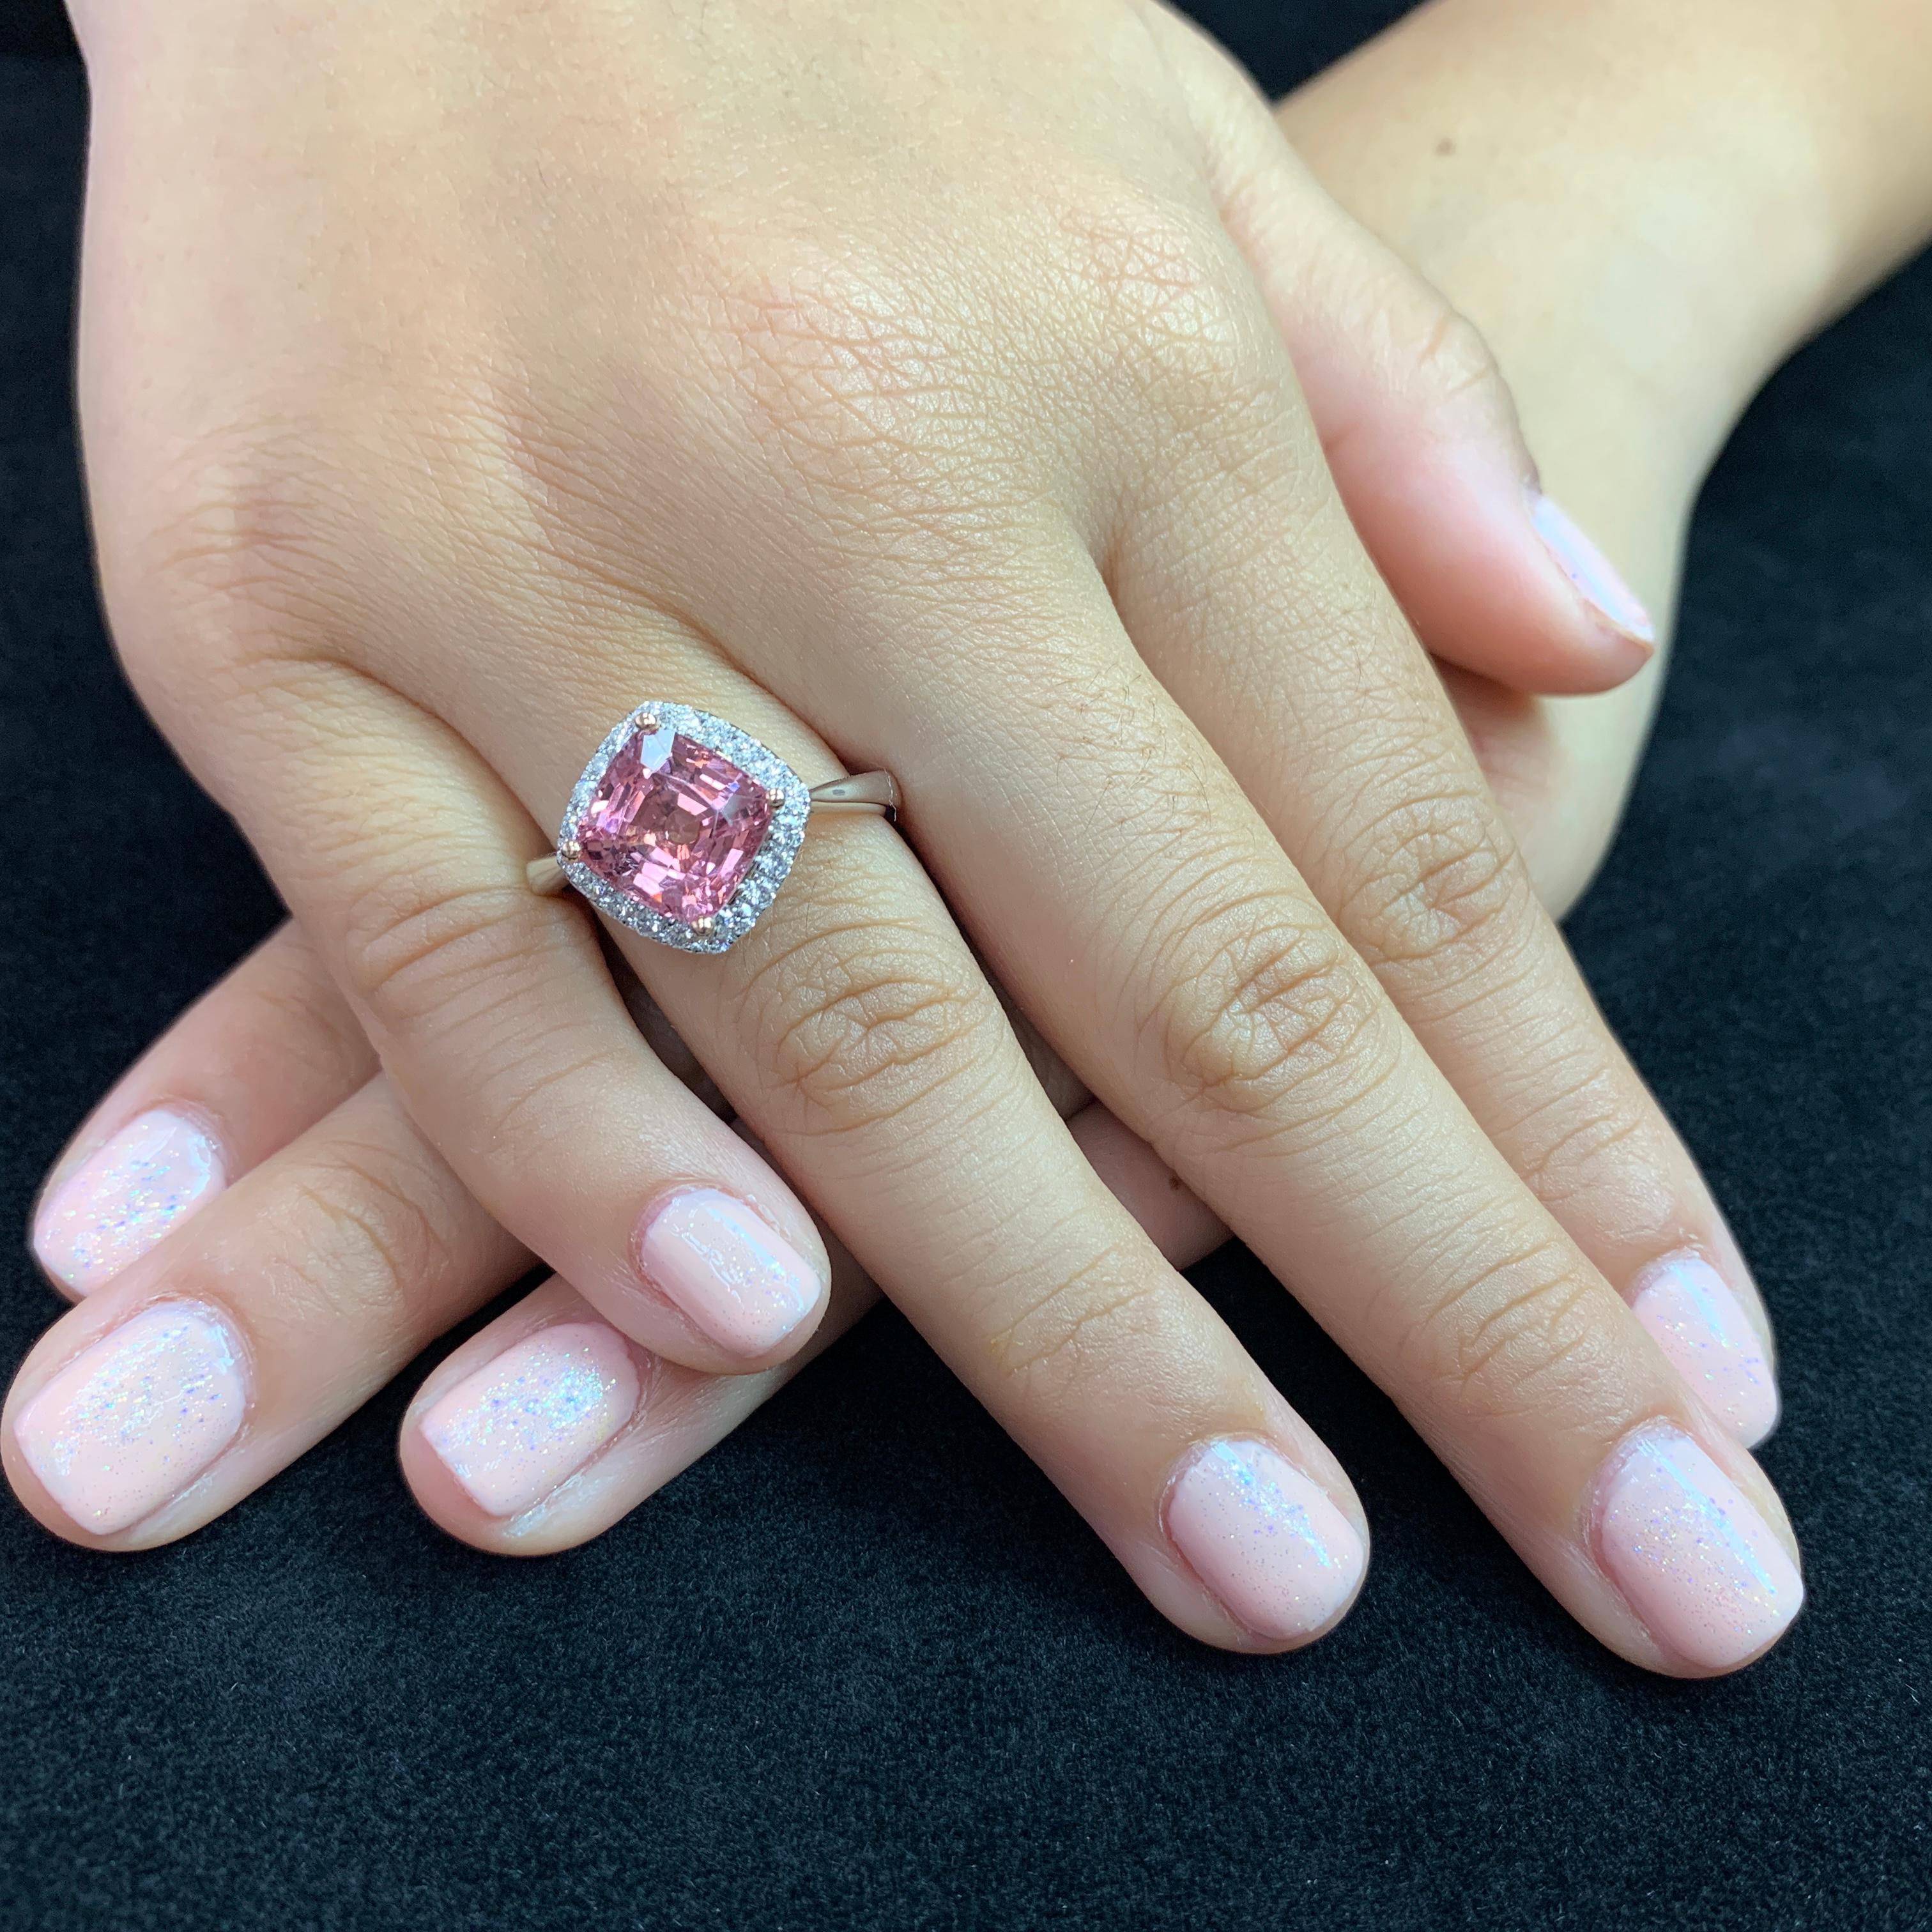 Here is a wonderful Spinel ring. The ring is set in 18k white gold and diamonds. There are 0.29Cts of small round diamonds surrounding the center vivid pink Spinel. The Natural Spinel is well cut. The color is crispy and vivid. The ring is full of